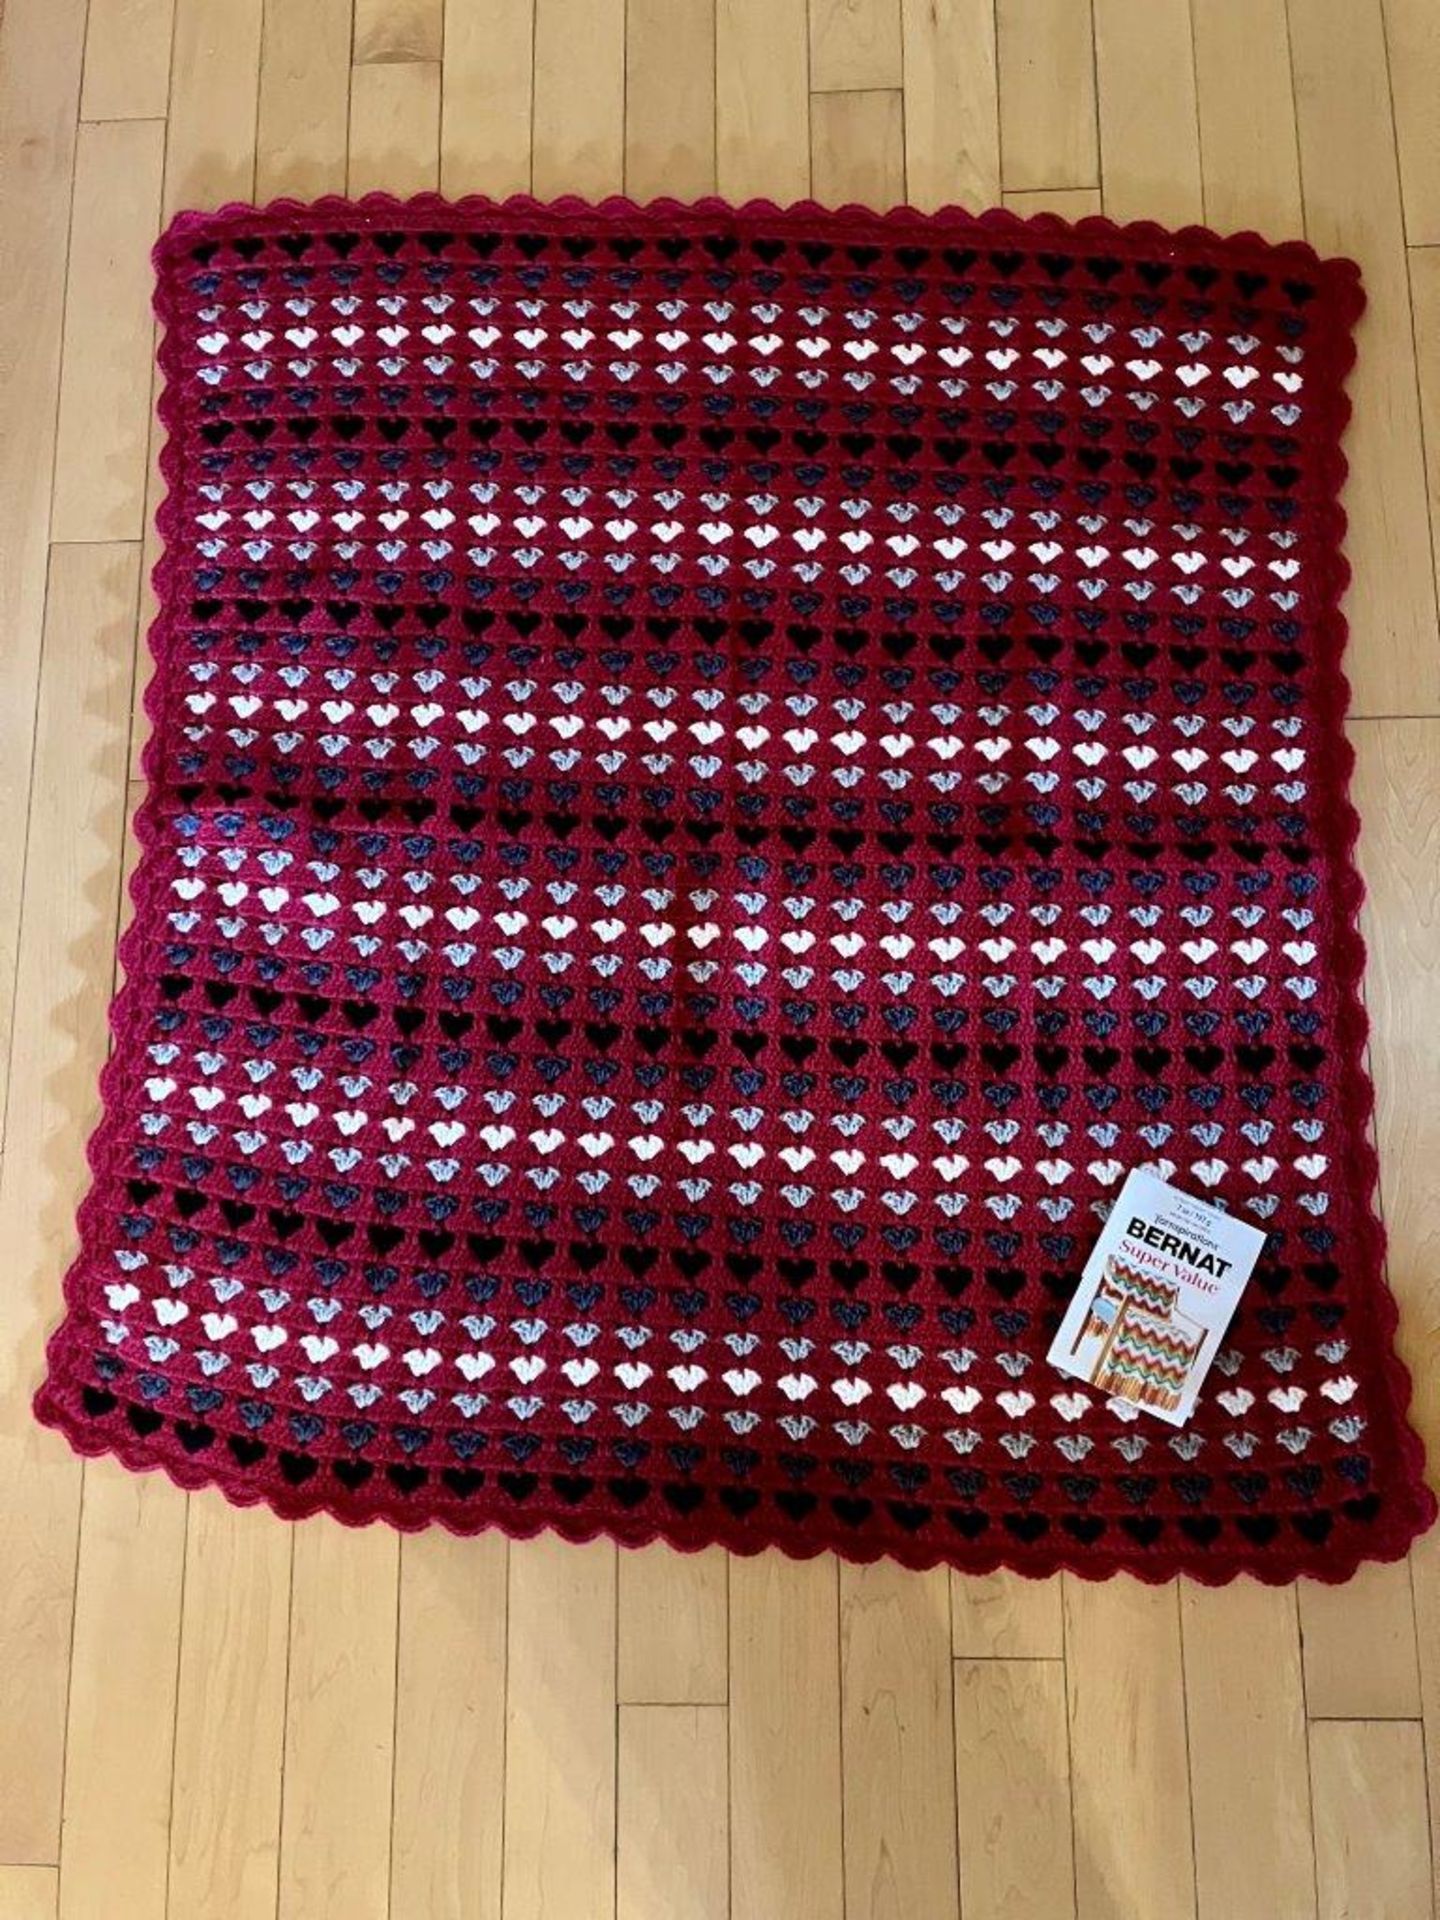 BEAUTIFUL HANDCRAFTED BABY AFGHAN